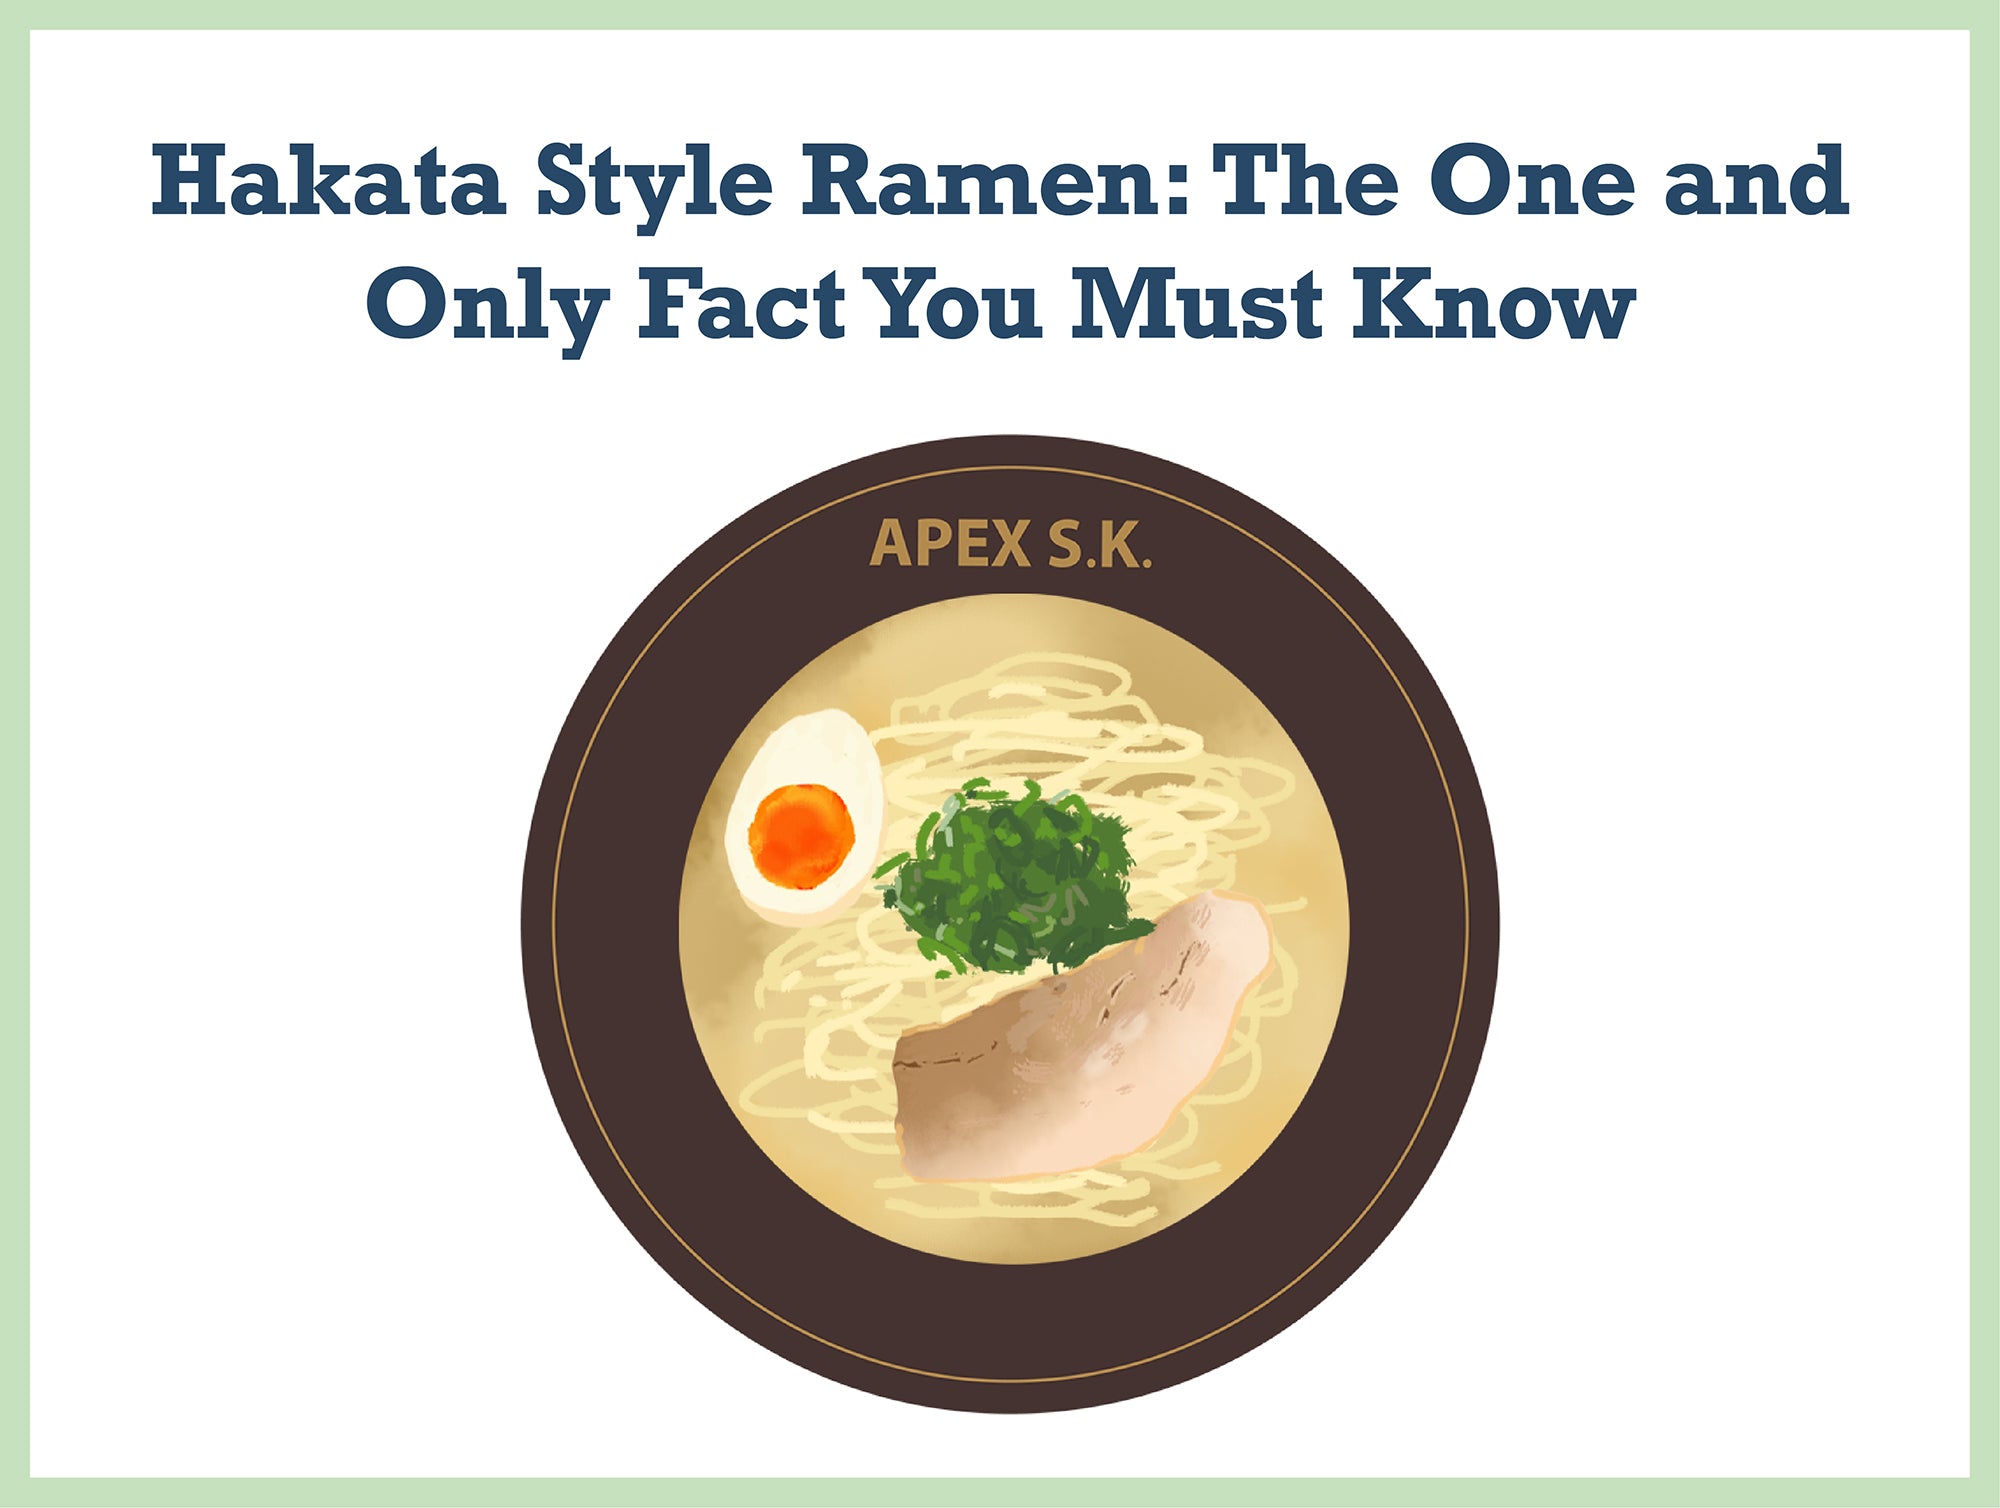 Hakata Style Ramen: The One and Only Fact You Must Know